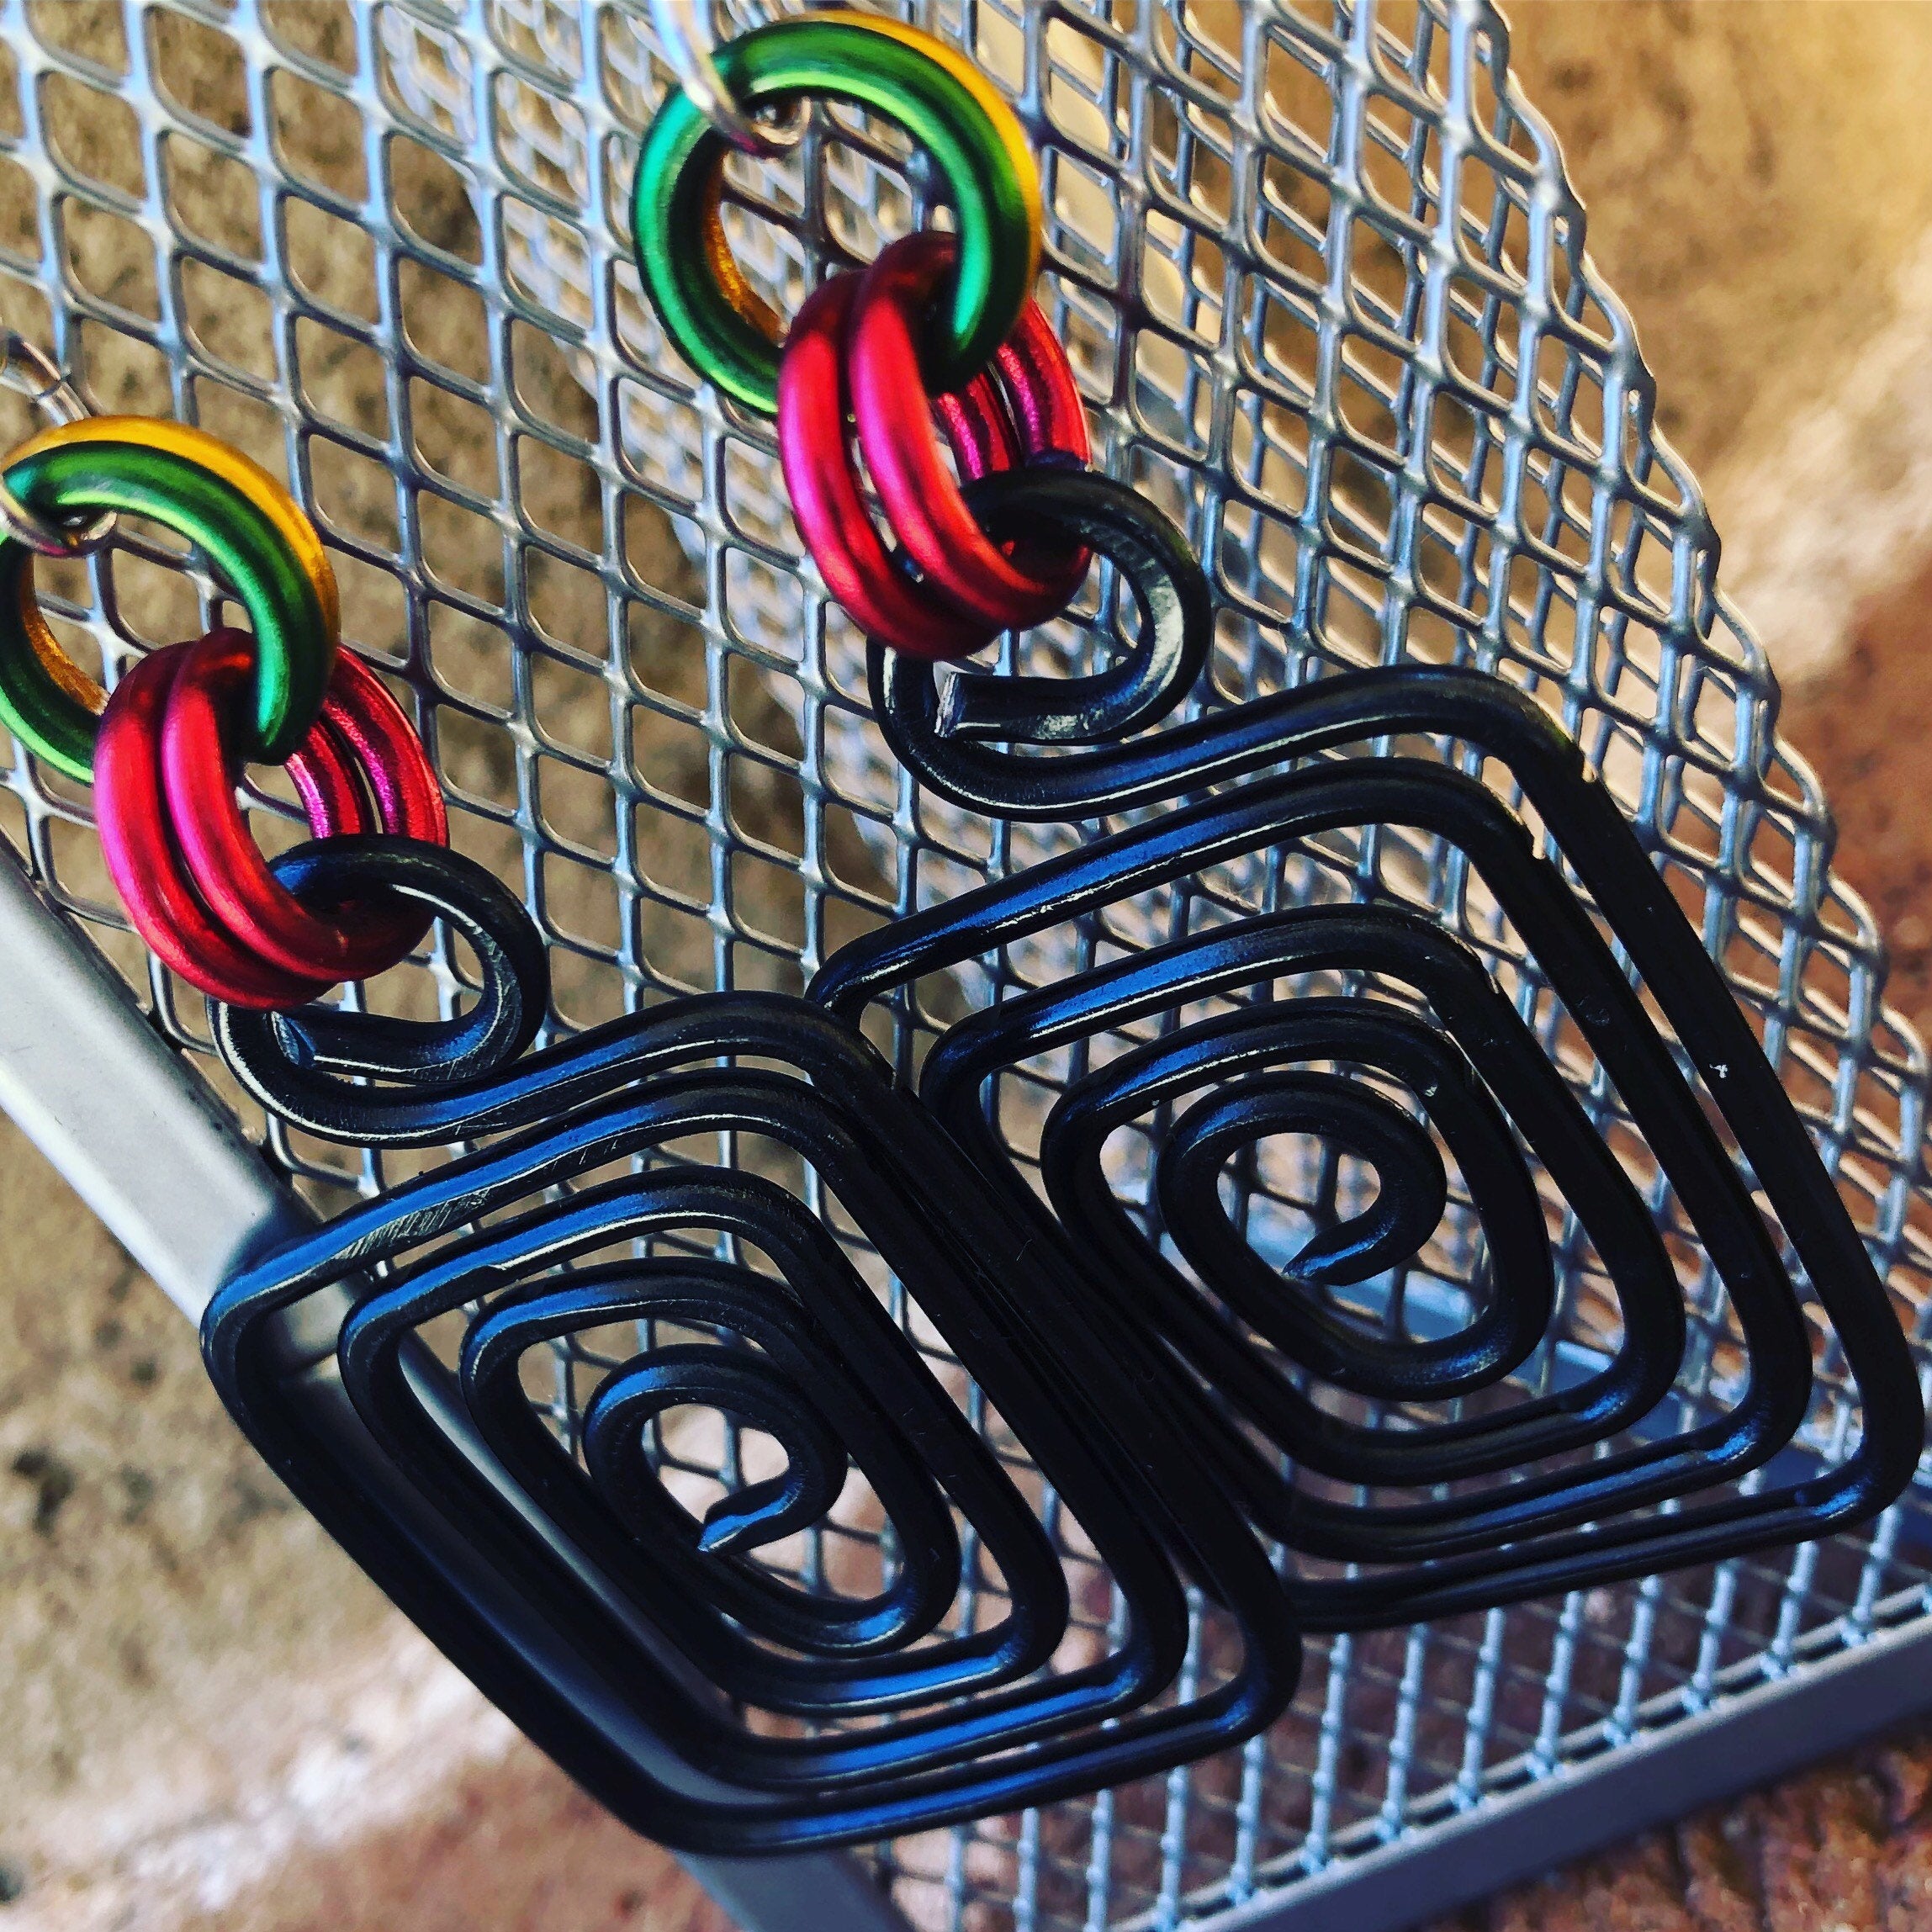 Square Wakanda Inspired Earrings, Afrocentric Earrings, Black Red Green and Gold Earrings